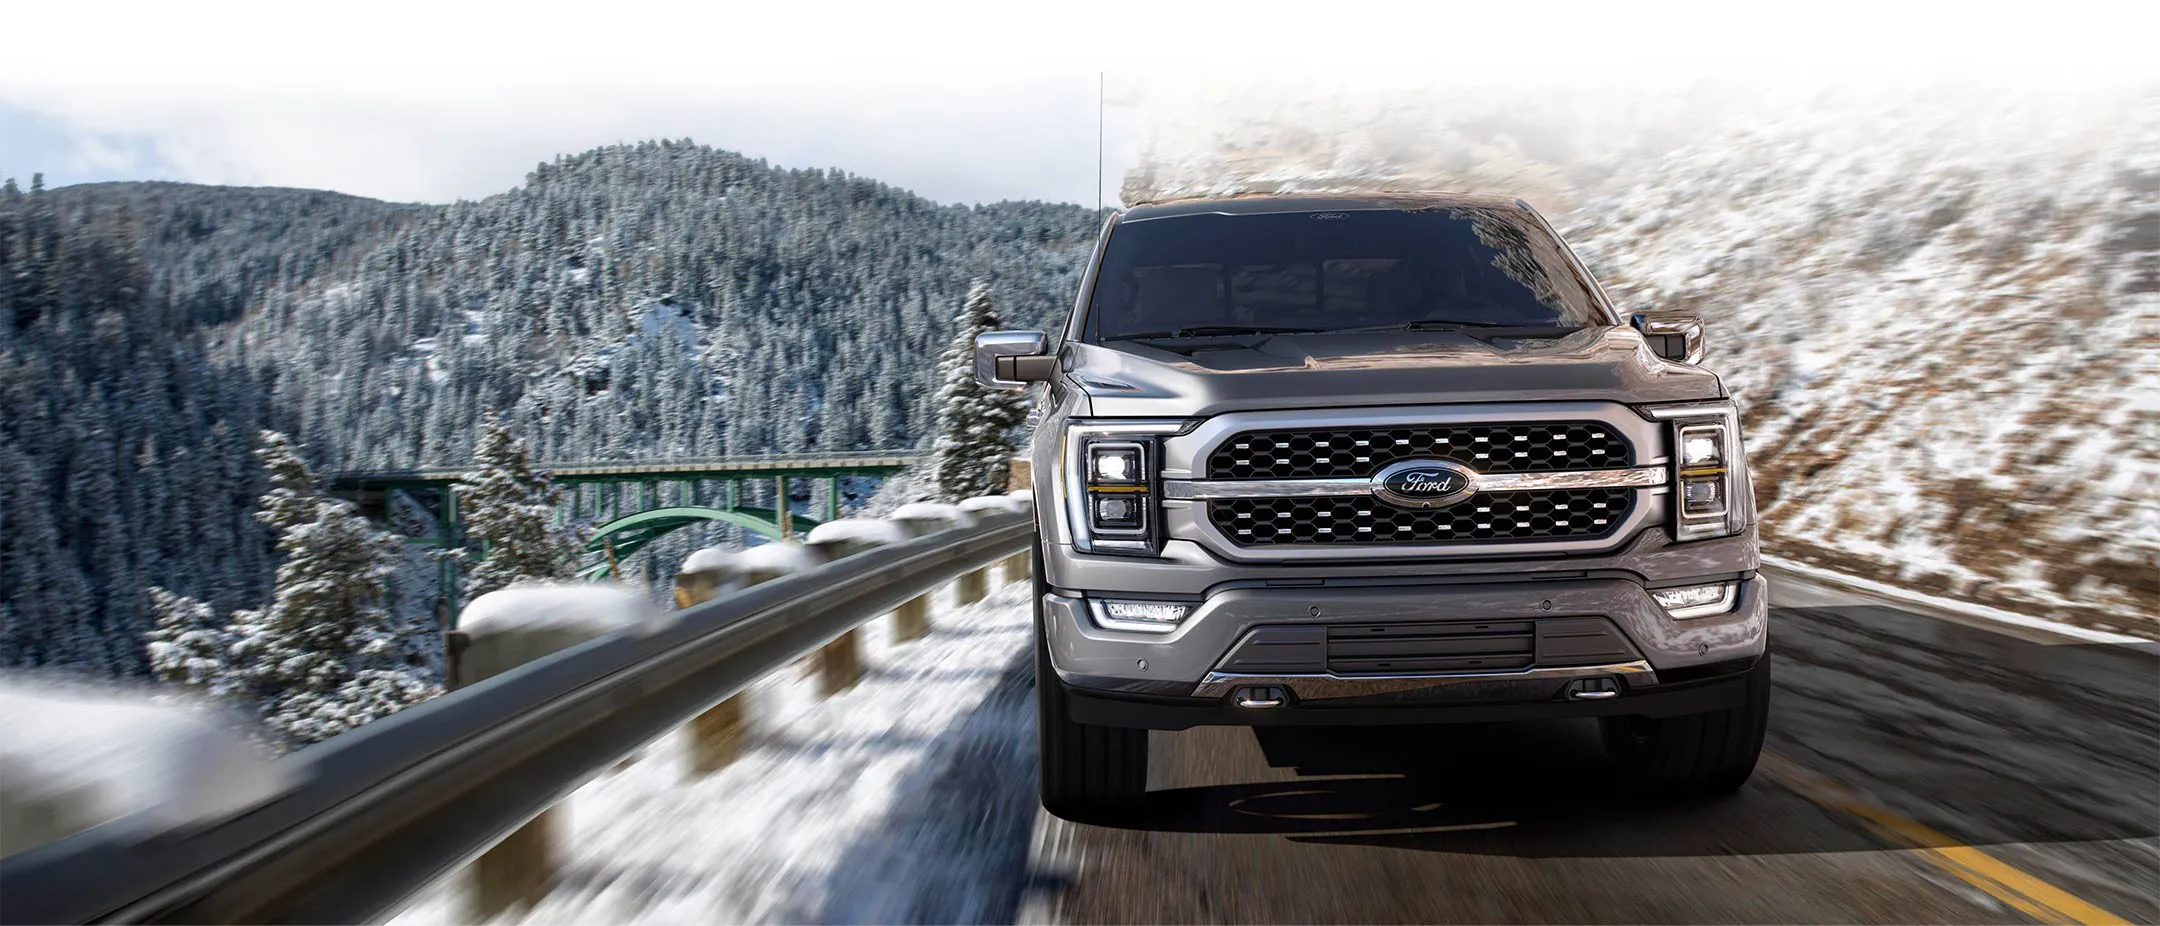 A silver 2023 Ford F-150 shown from the front and driving down a mountain road, with trees and snow in the background.